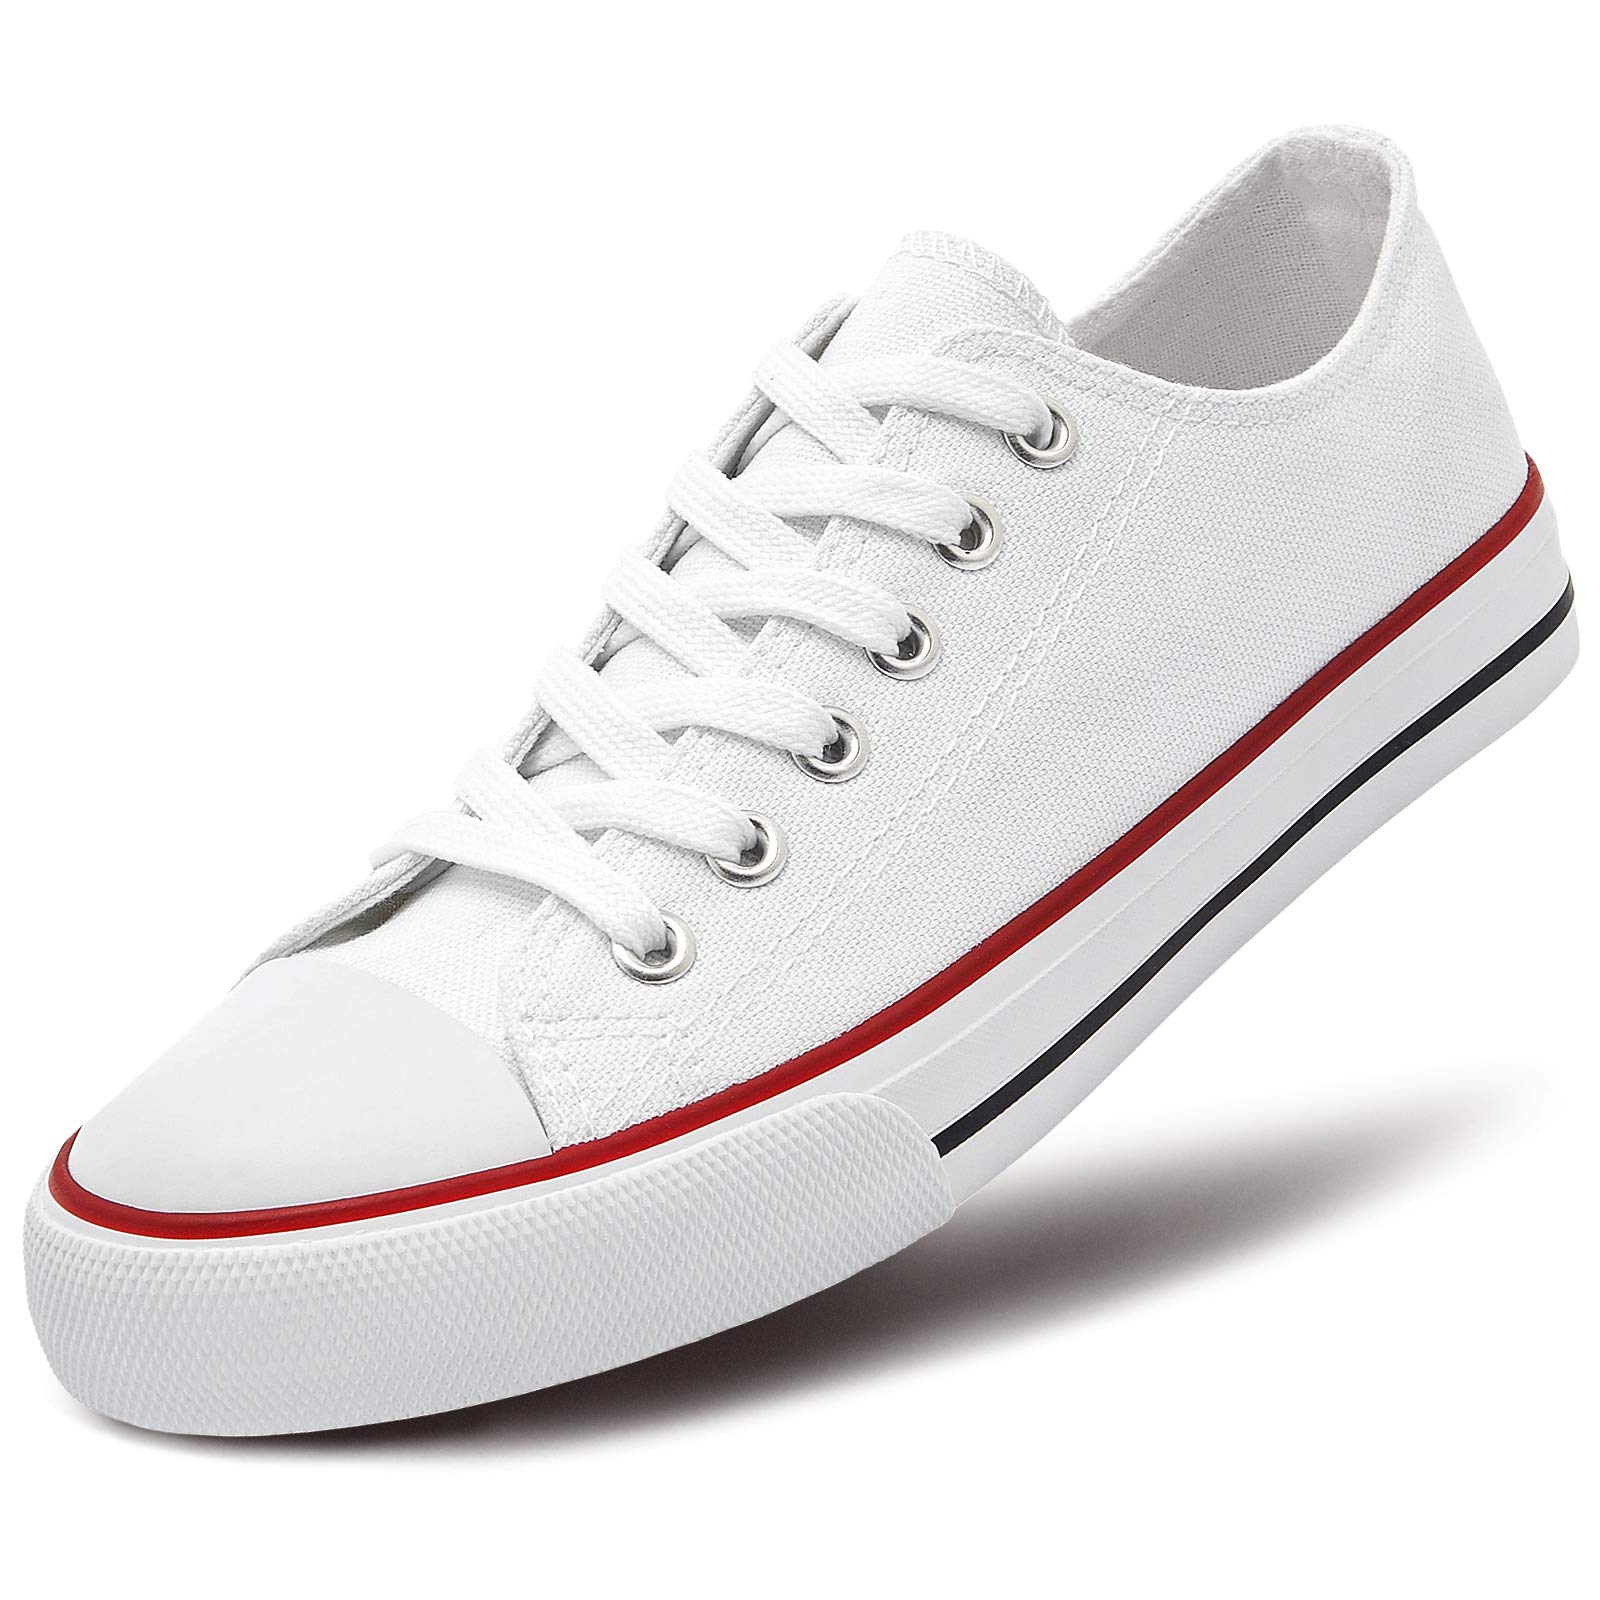 Buy NISHANT Traders® Women's Canvas Shoes/Lightweight Low Top Lace-up Canvas  Sneakers for Women & Girls (NT-01-White-3) at Amazon.in